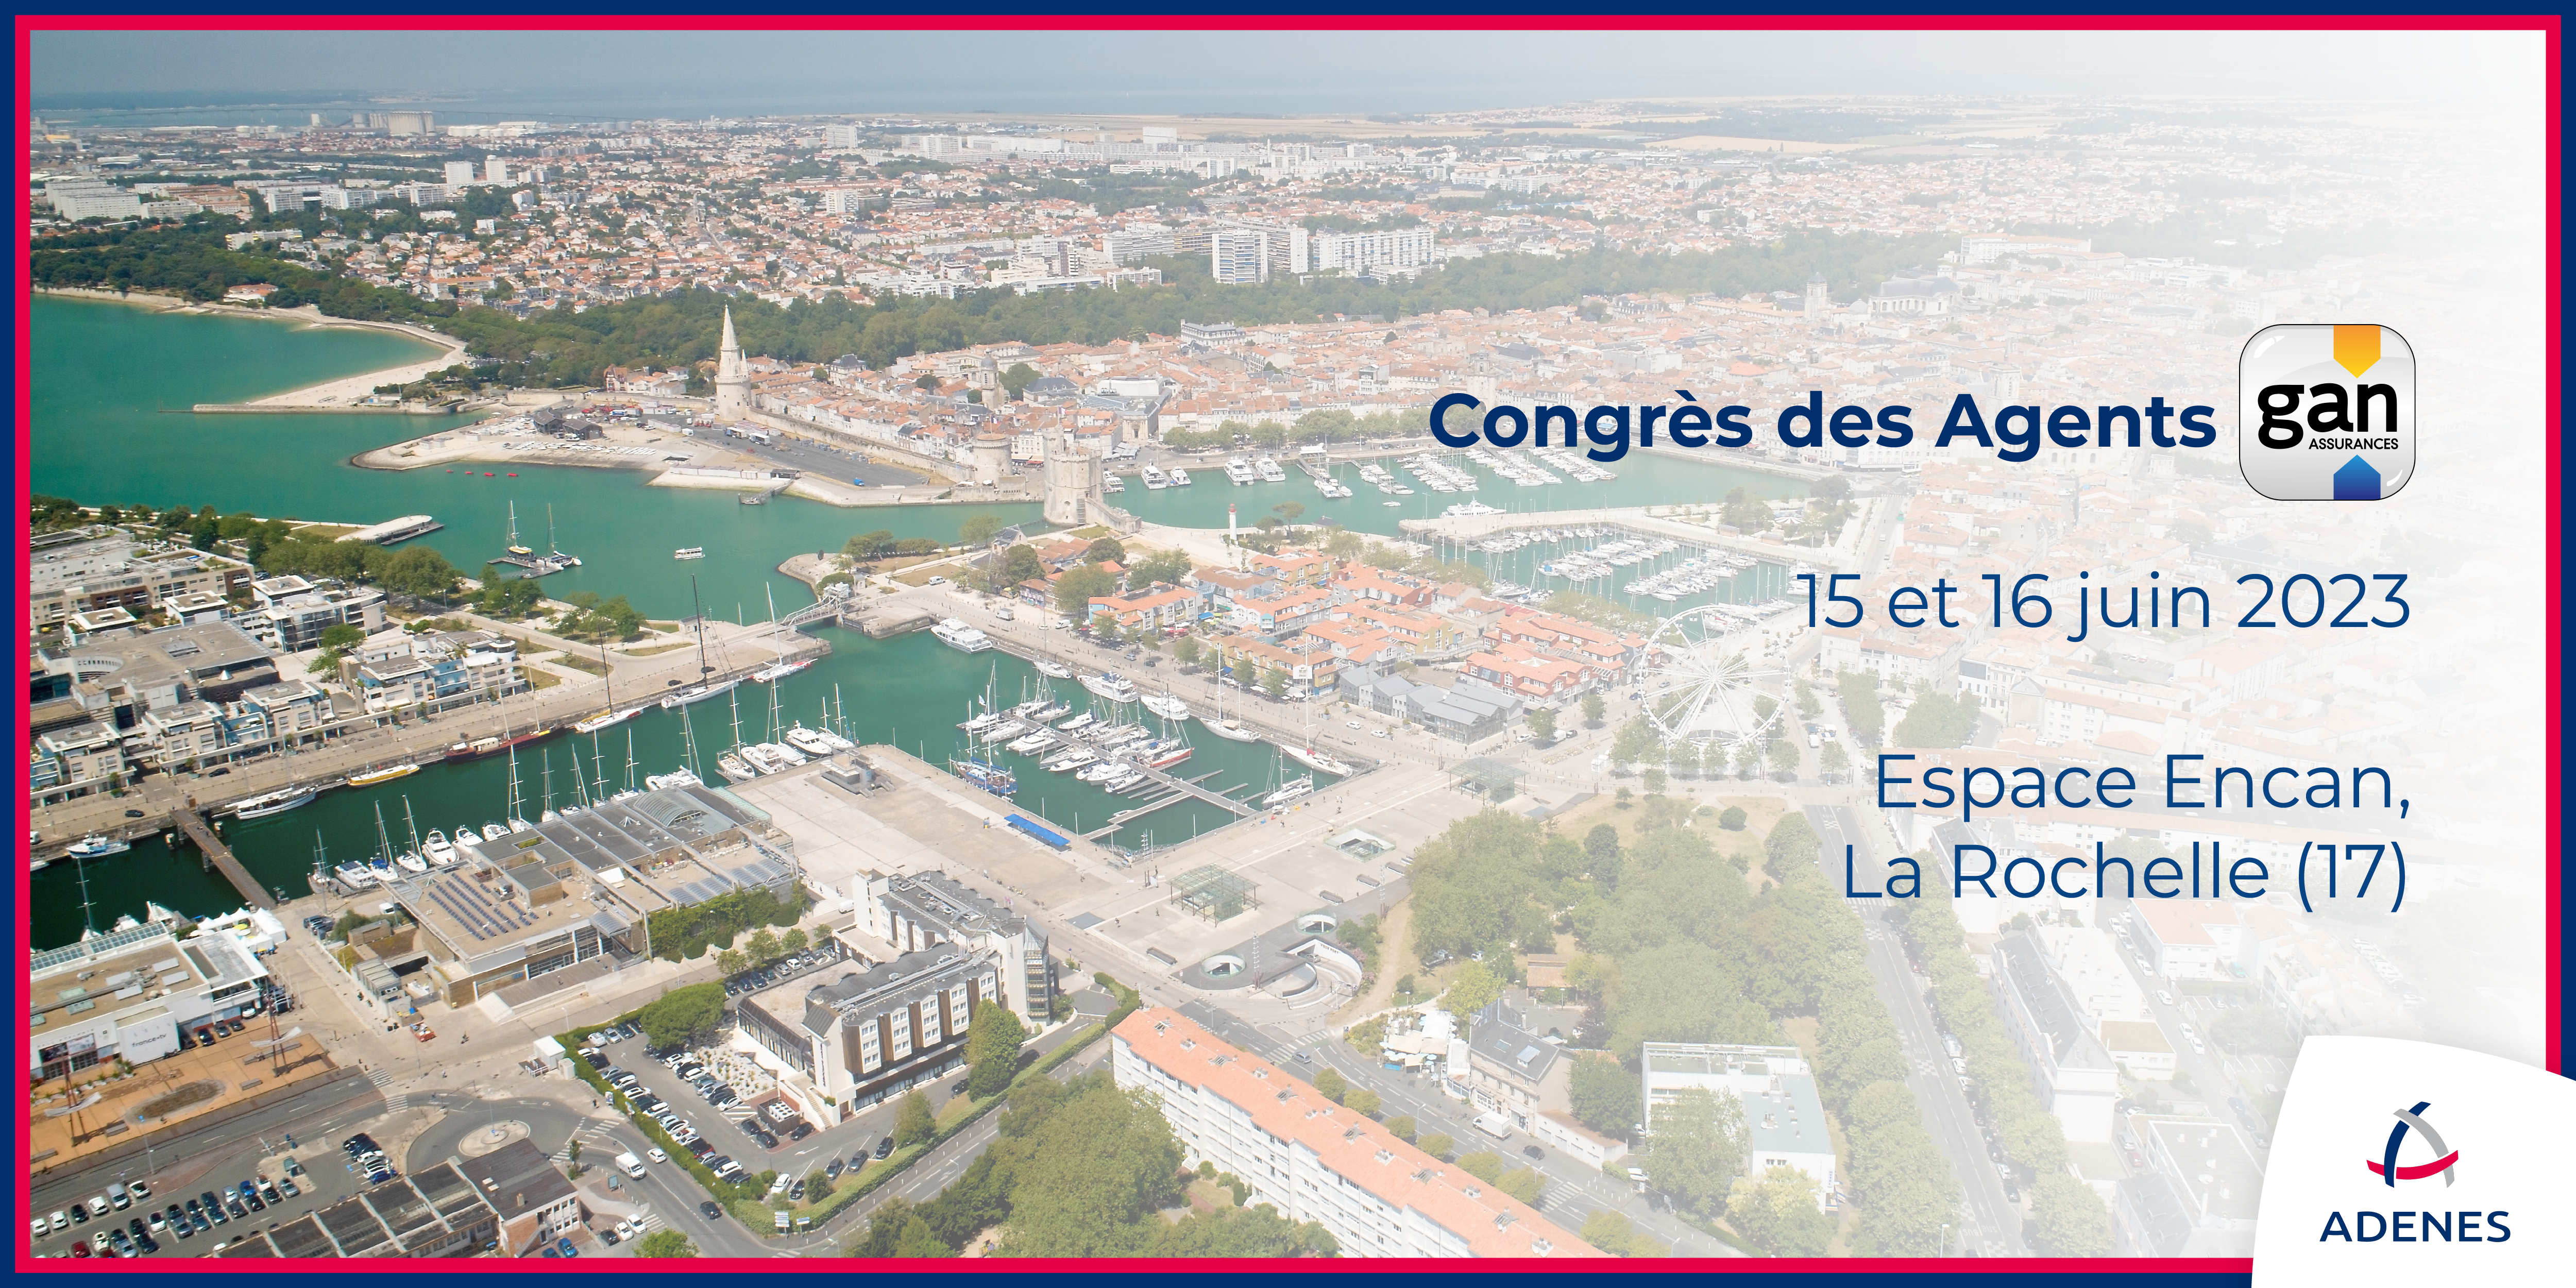 You are currently viewing #AdenesEvent – The ADENES Group will be present at the GAN Agents Congress in La Rochelle! ⛵